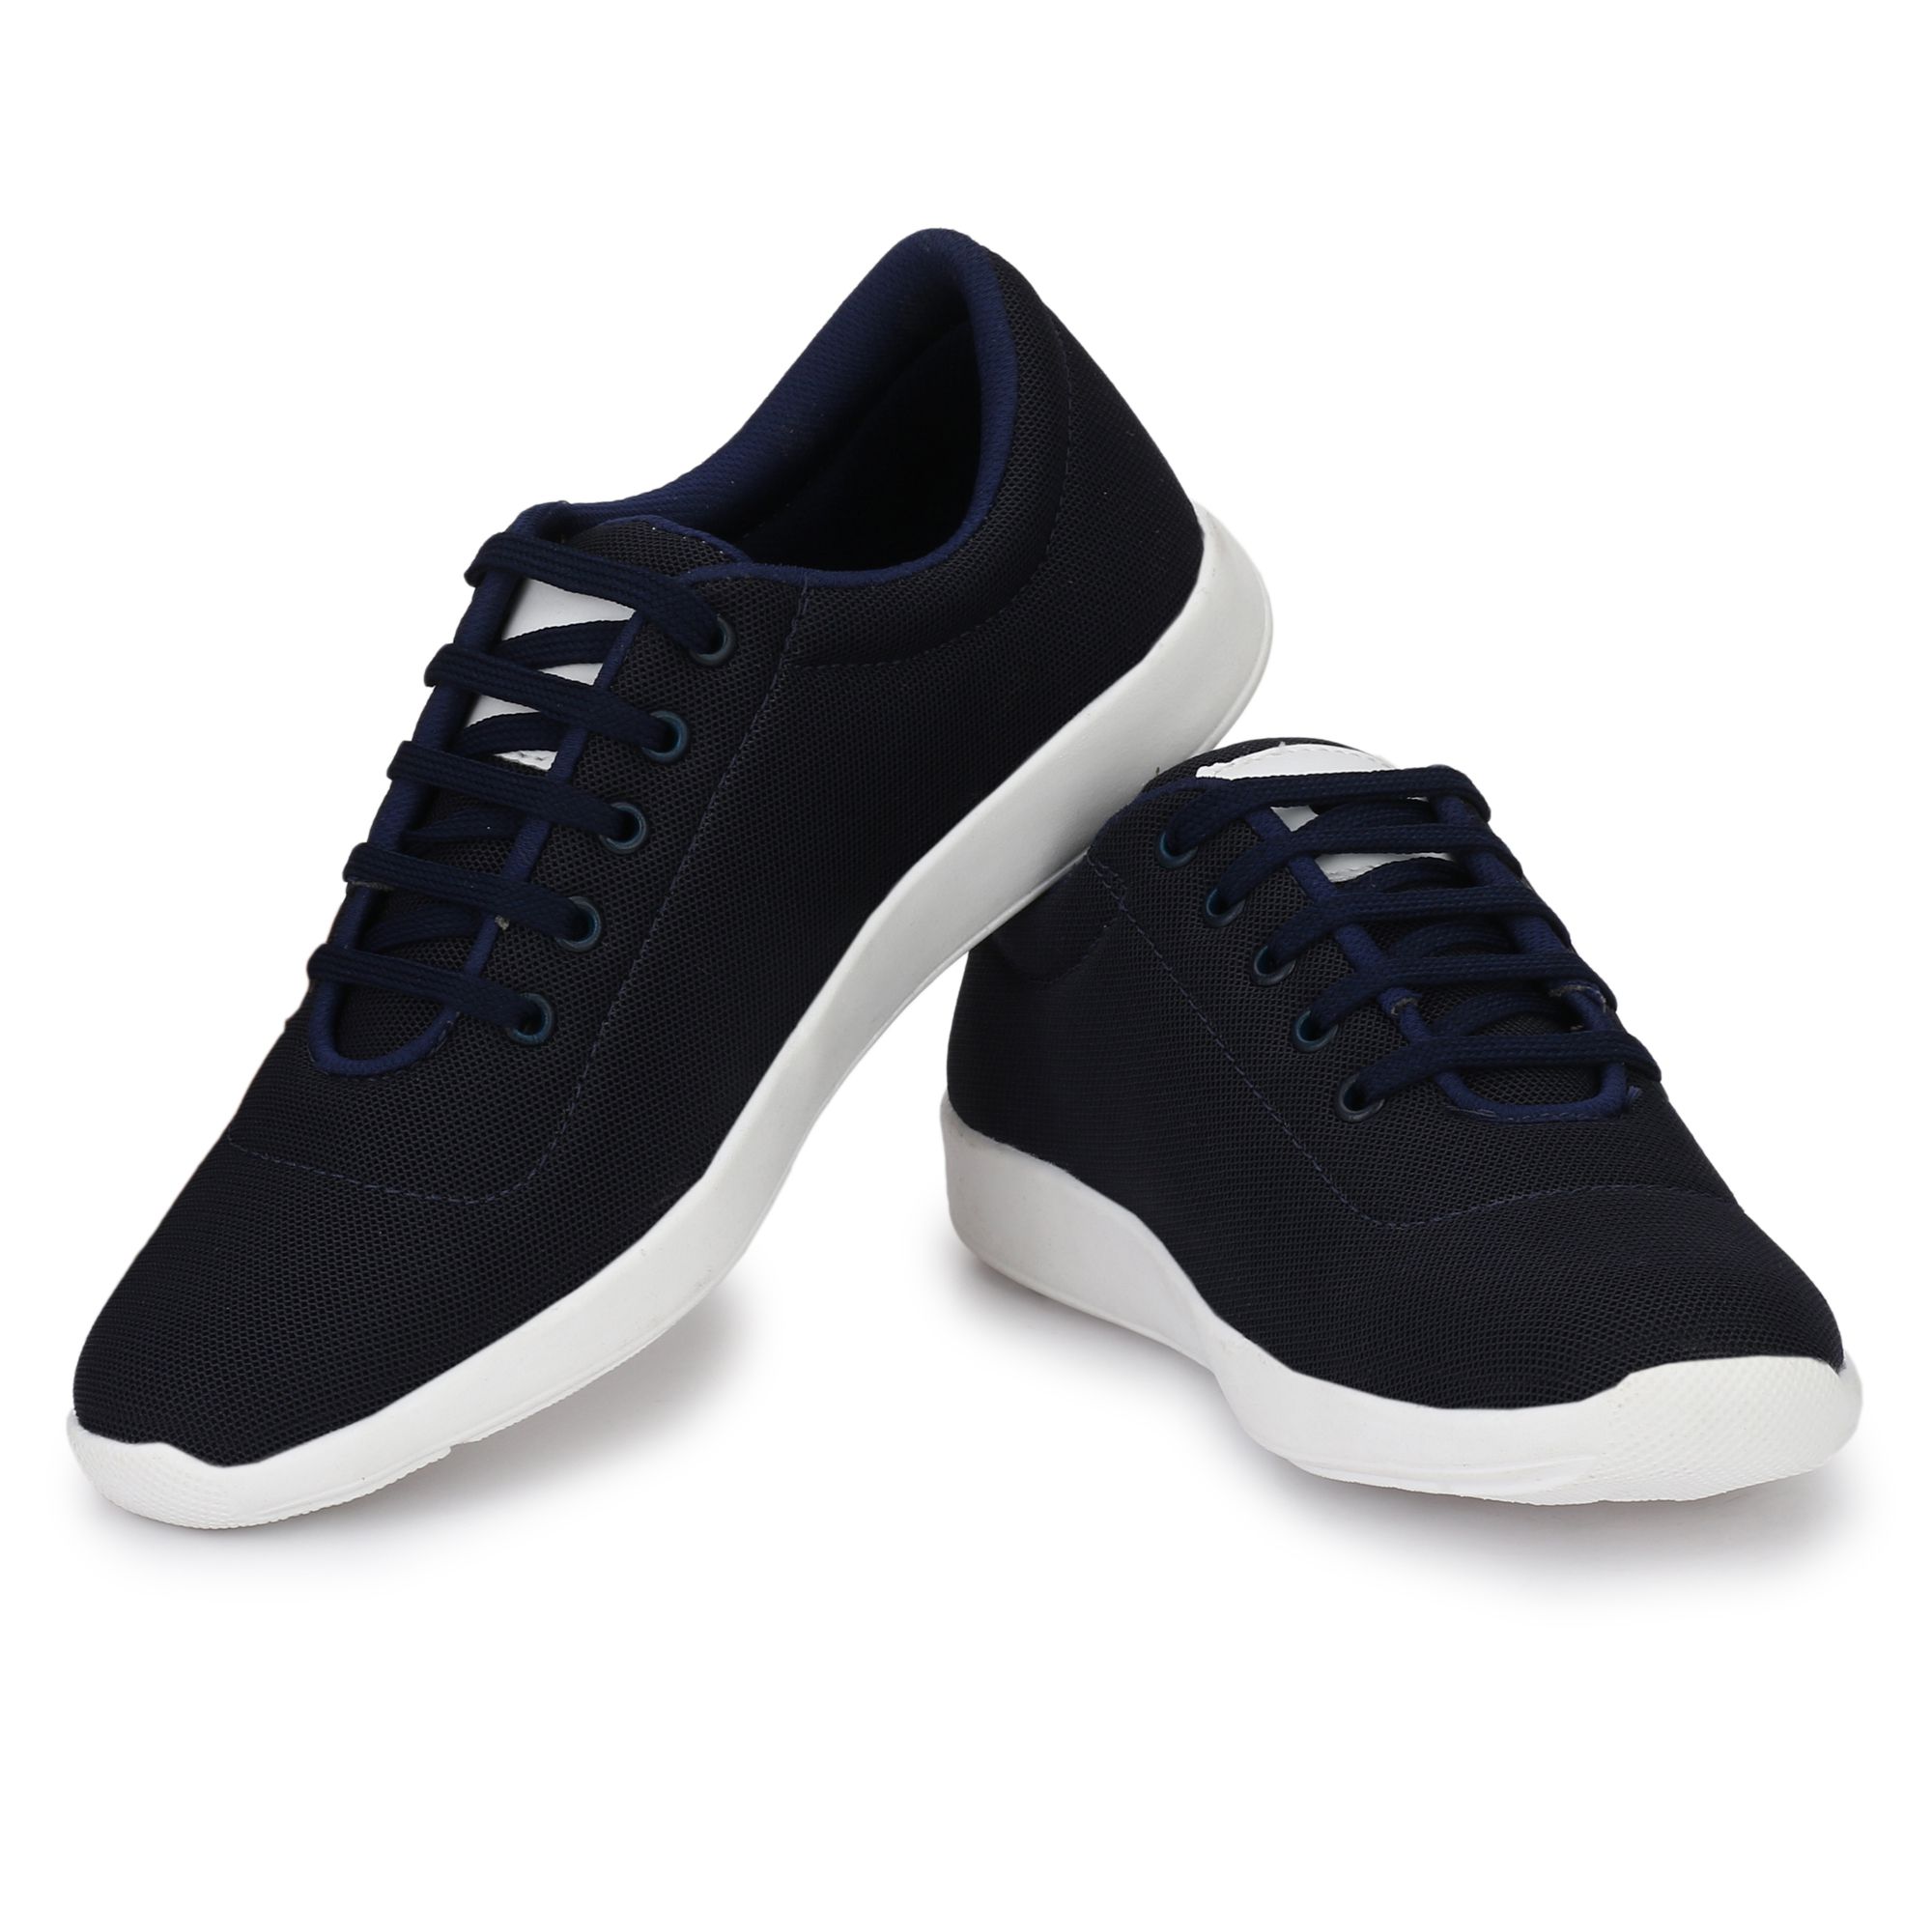 WHITE WAlKERS AIR Sneakers Blue Casual Shoes - Buy WHITE WAlKERS AIR ...